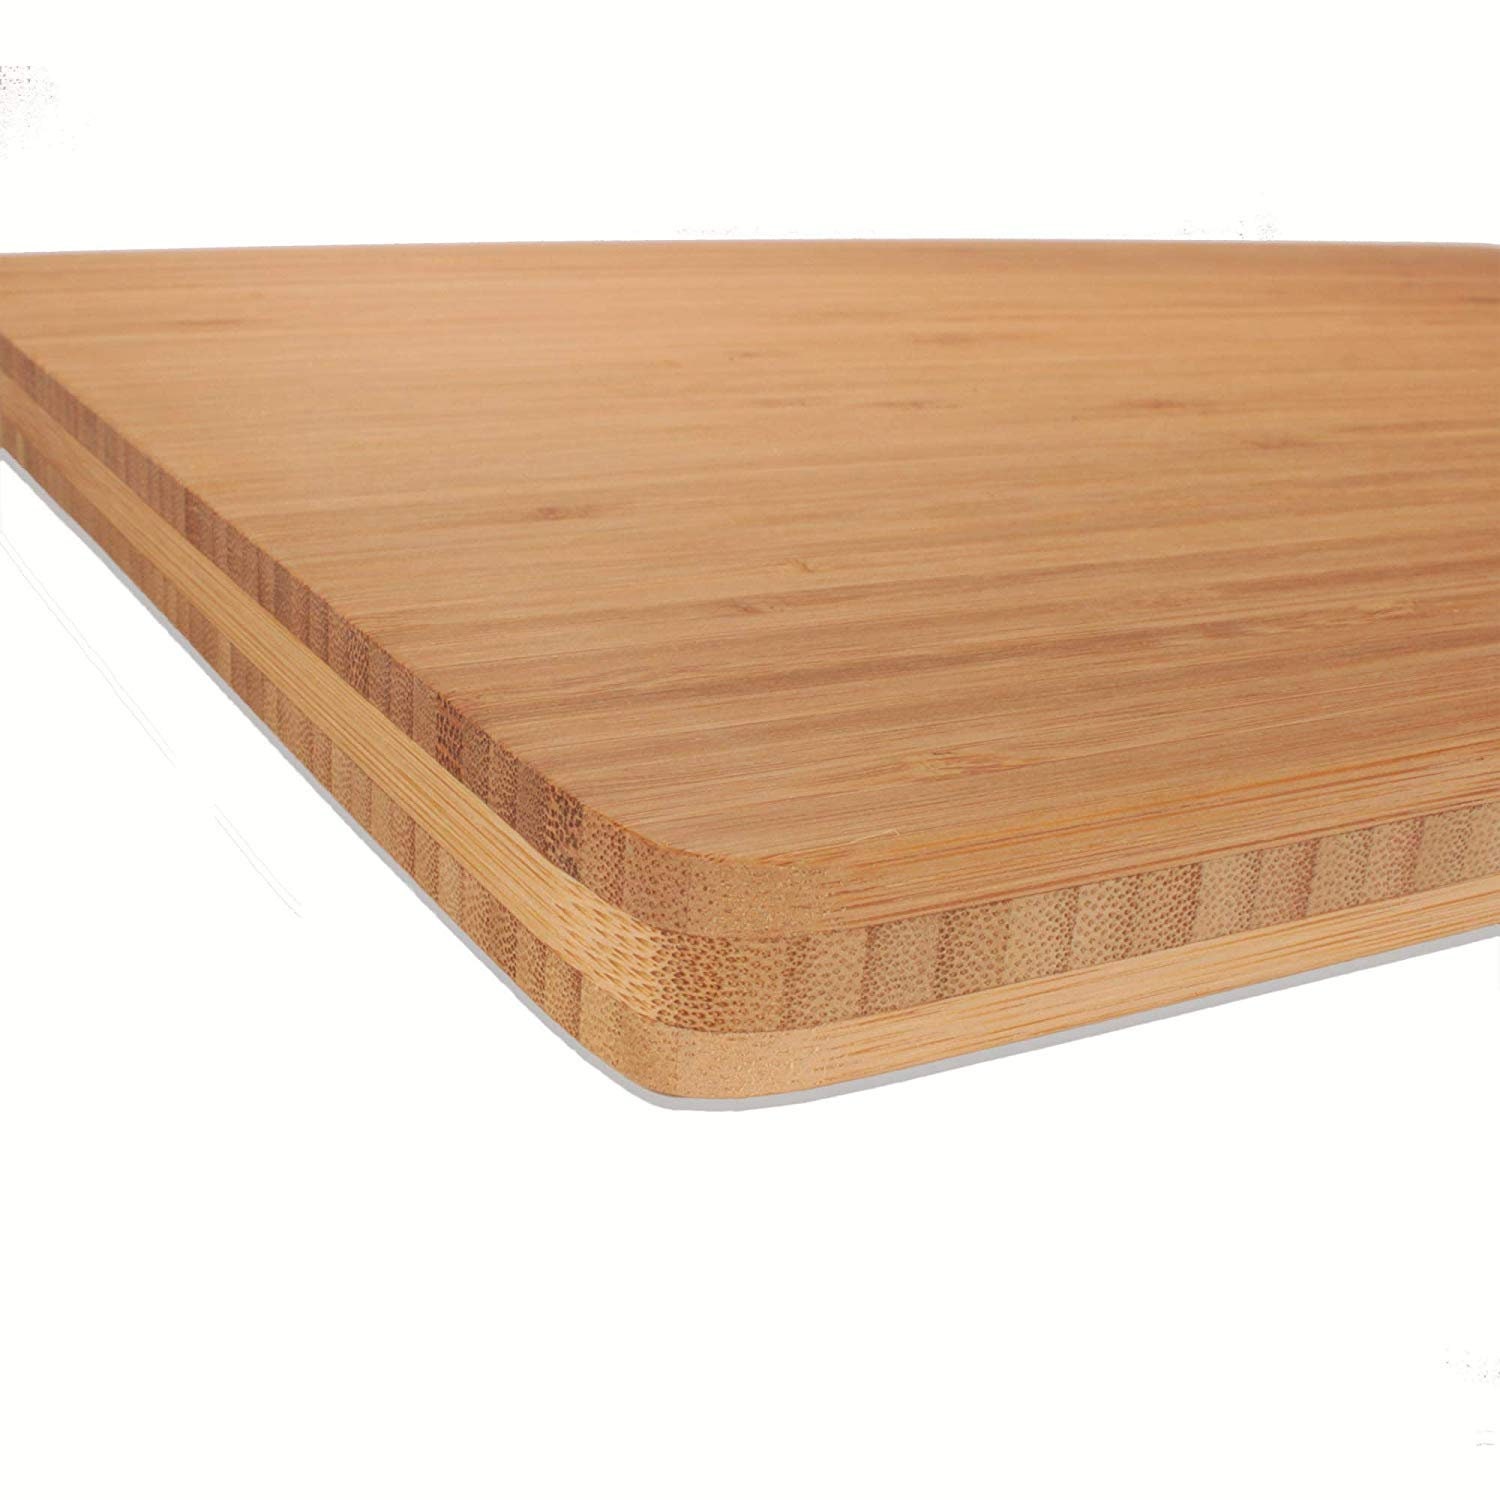  Oneida Cutting Boards, Set of 2, 15.75 x 9.25 and 11.75 x 7  Sizes: Home & Kitchen